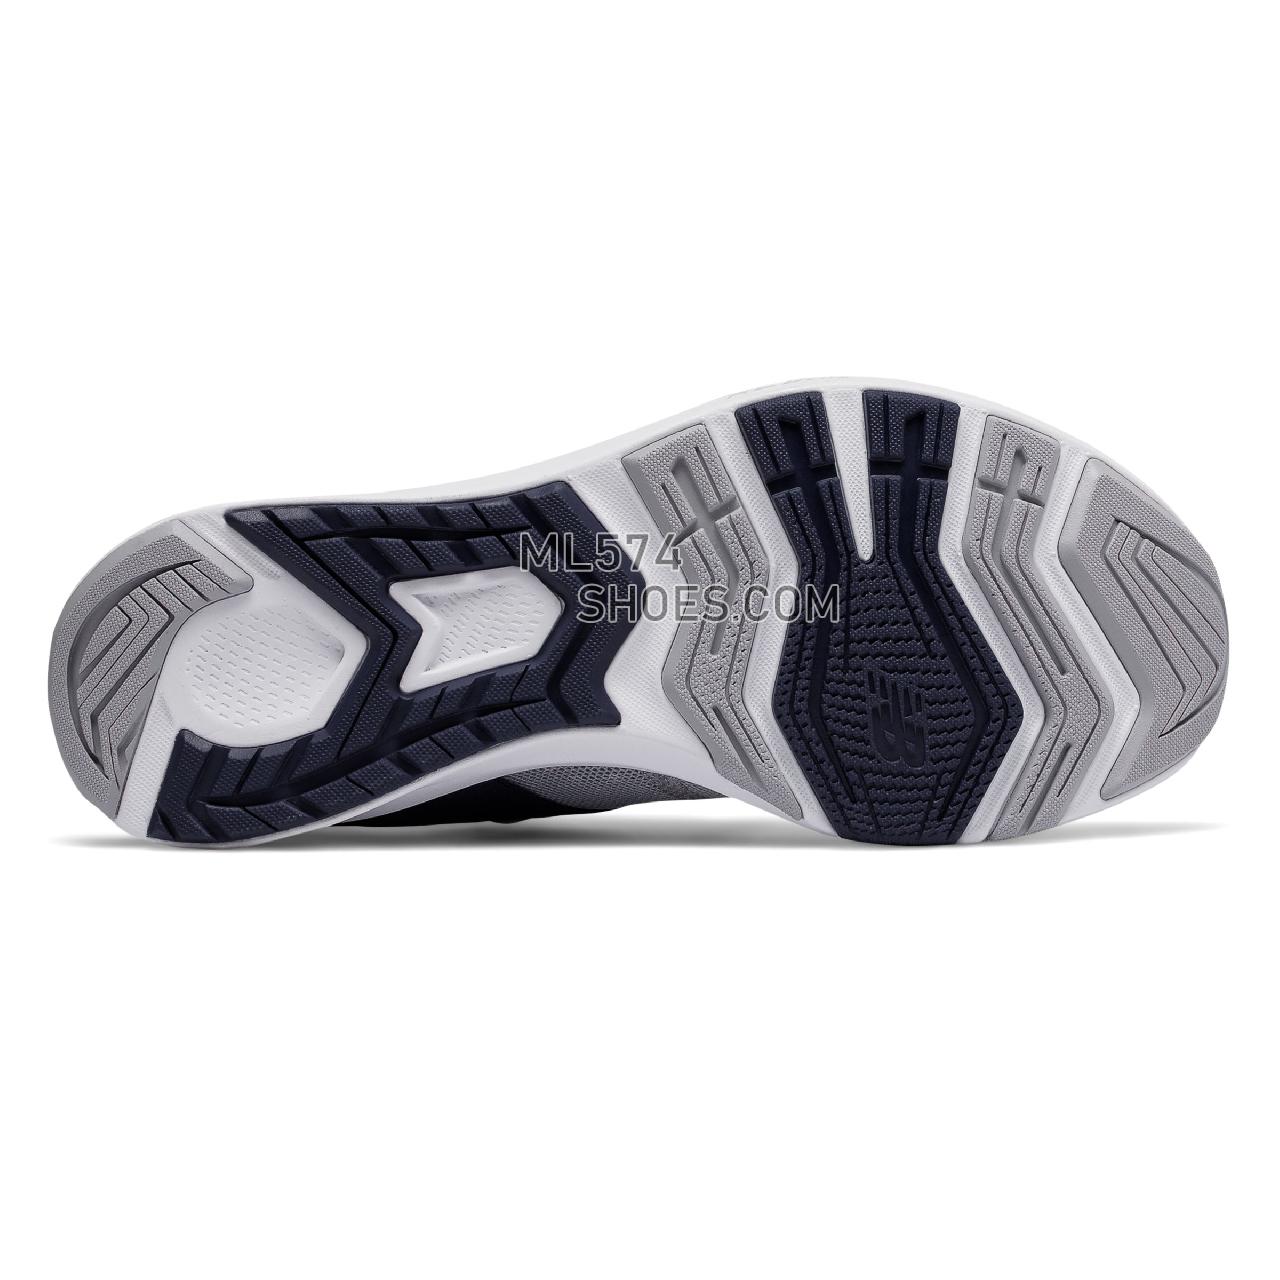 New Balance FuelCore NERGIZE Fun Pack - Women's  - X-training Navy with Light Grey - WXNRGFP